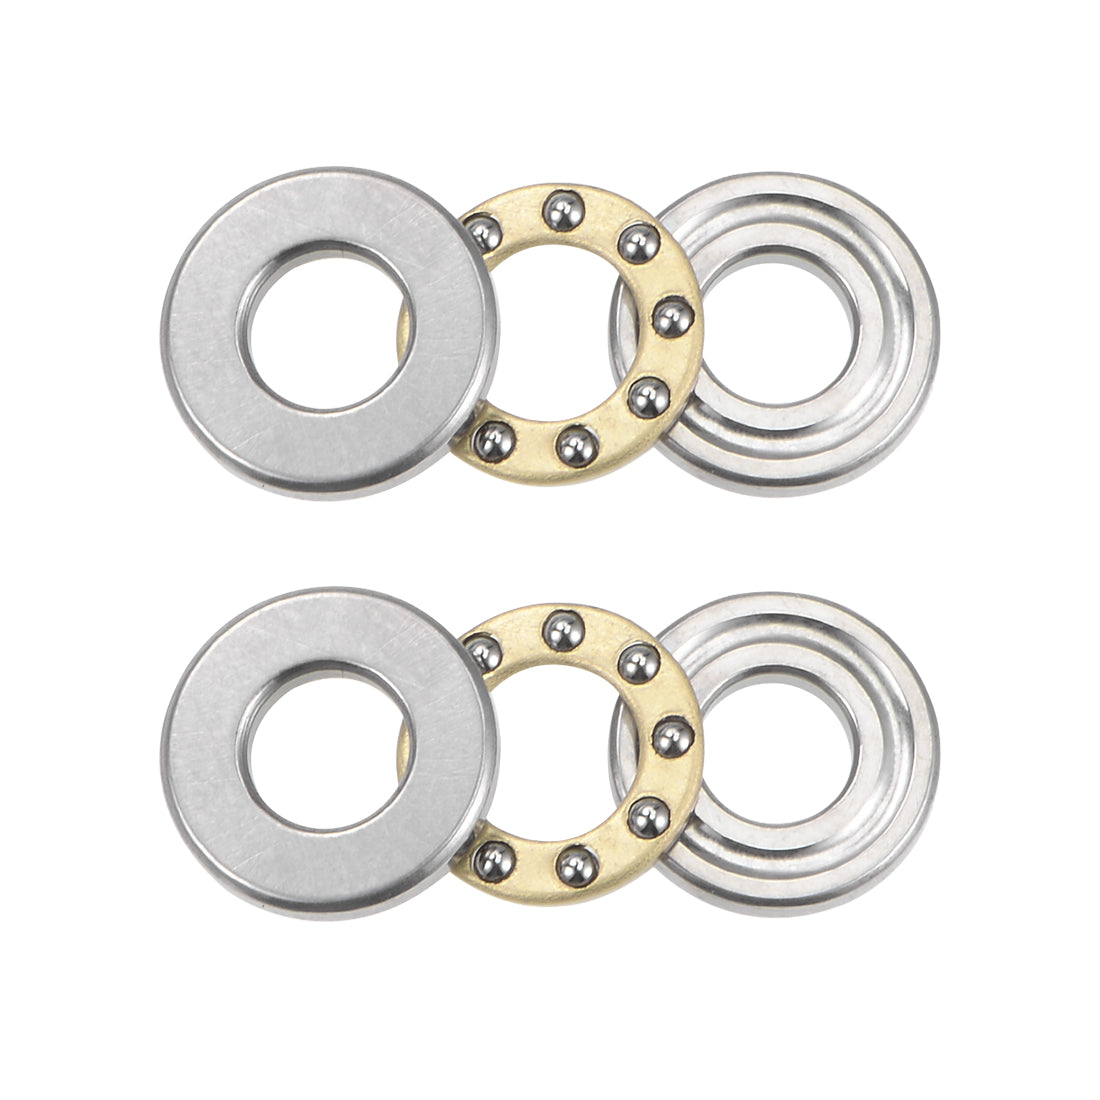 uxcell Uxcell F5-11M Miniature Thrust Ball Bearing 5x11x4.5mm Chrome Steel with Washer 2Pcs